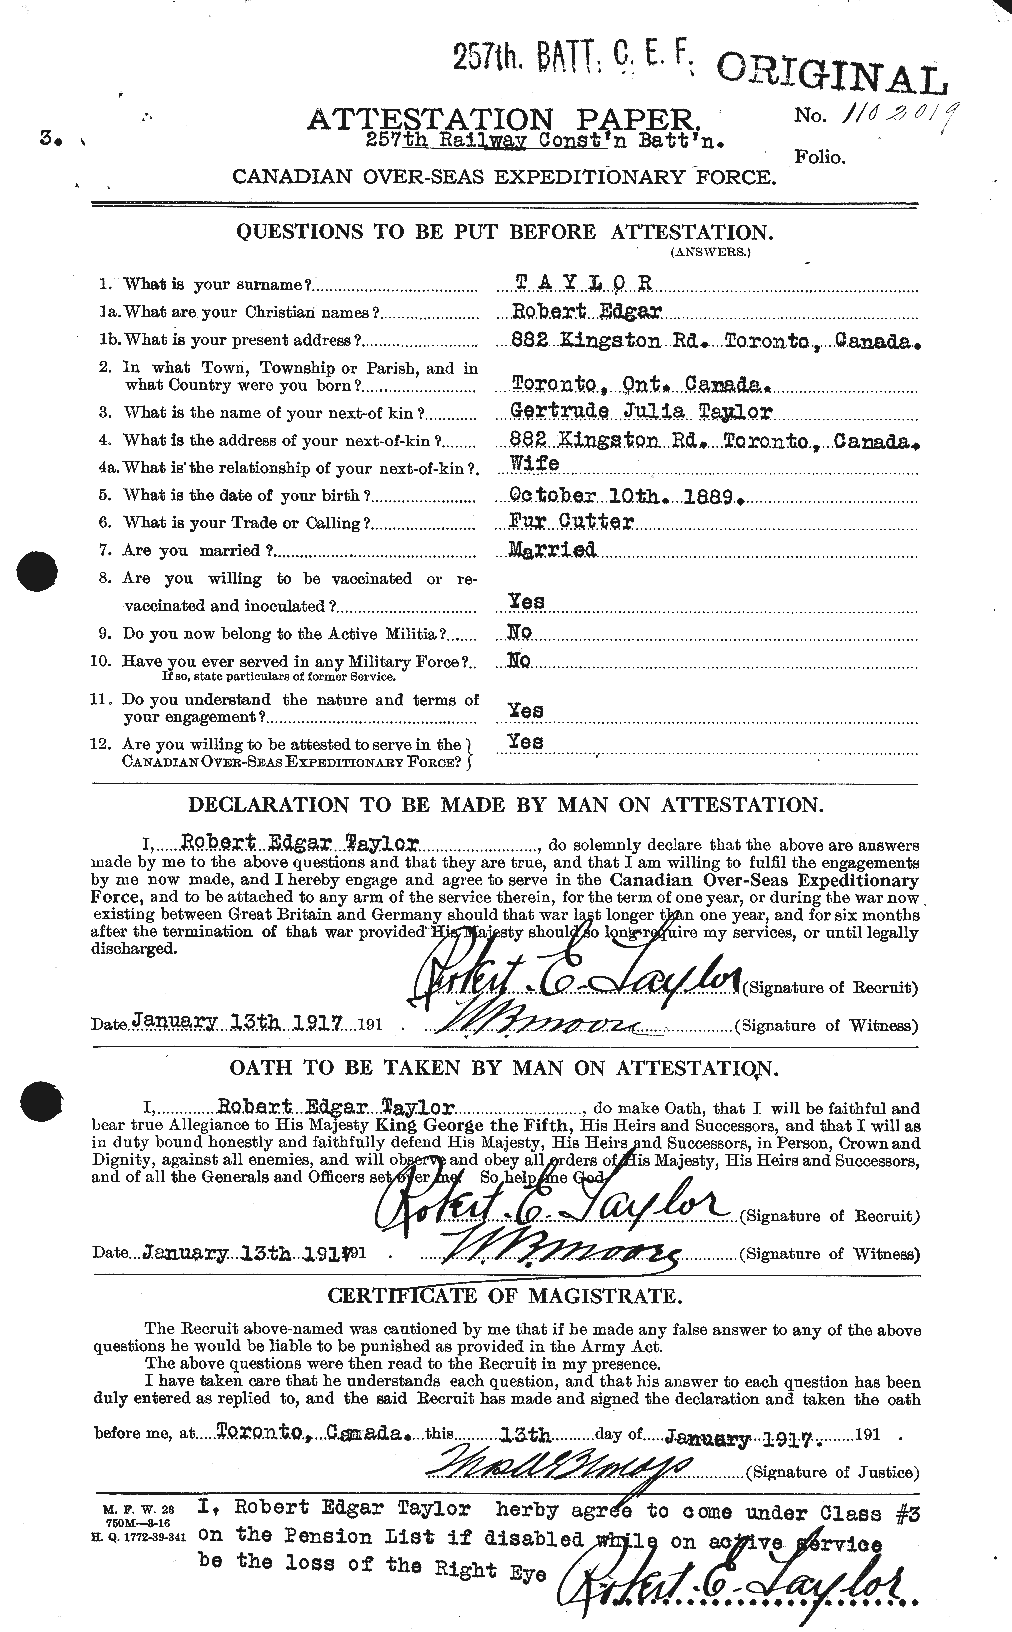 Personnel Records of the First World War - CEF 627473a